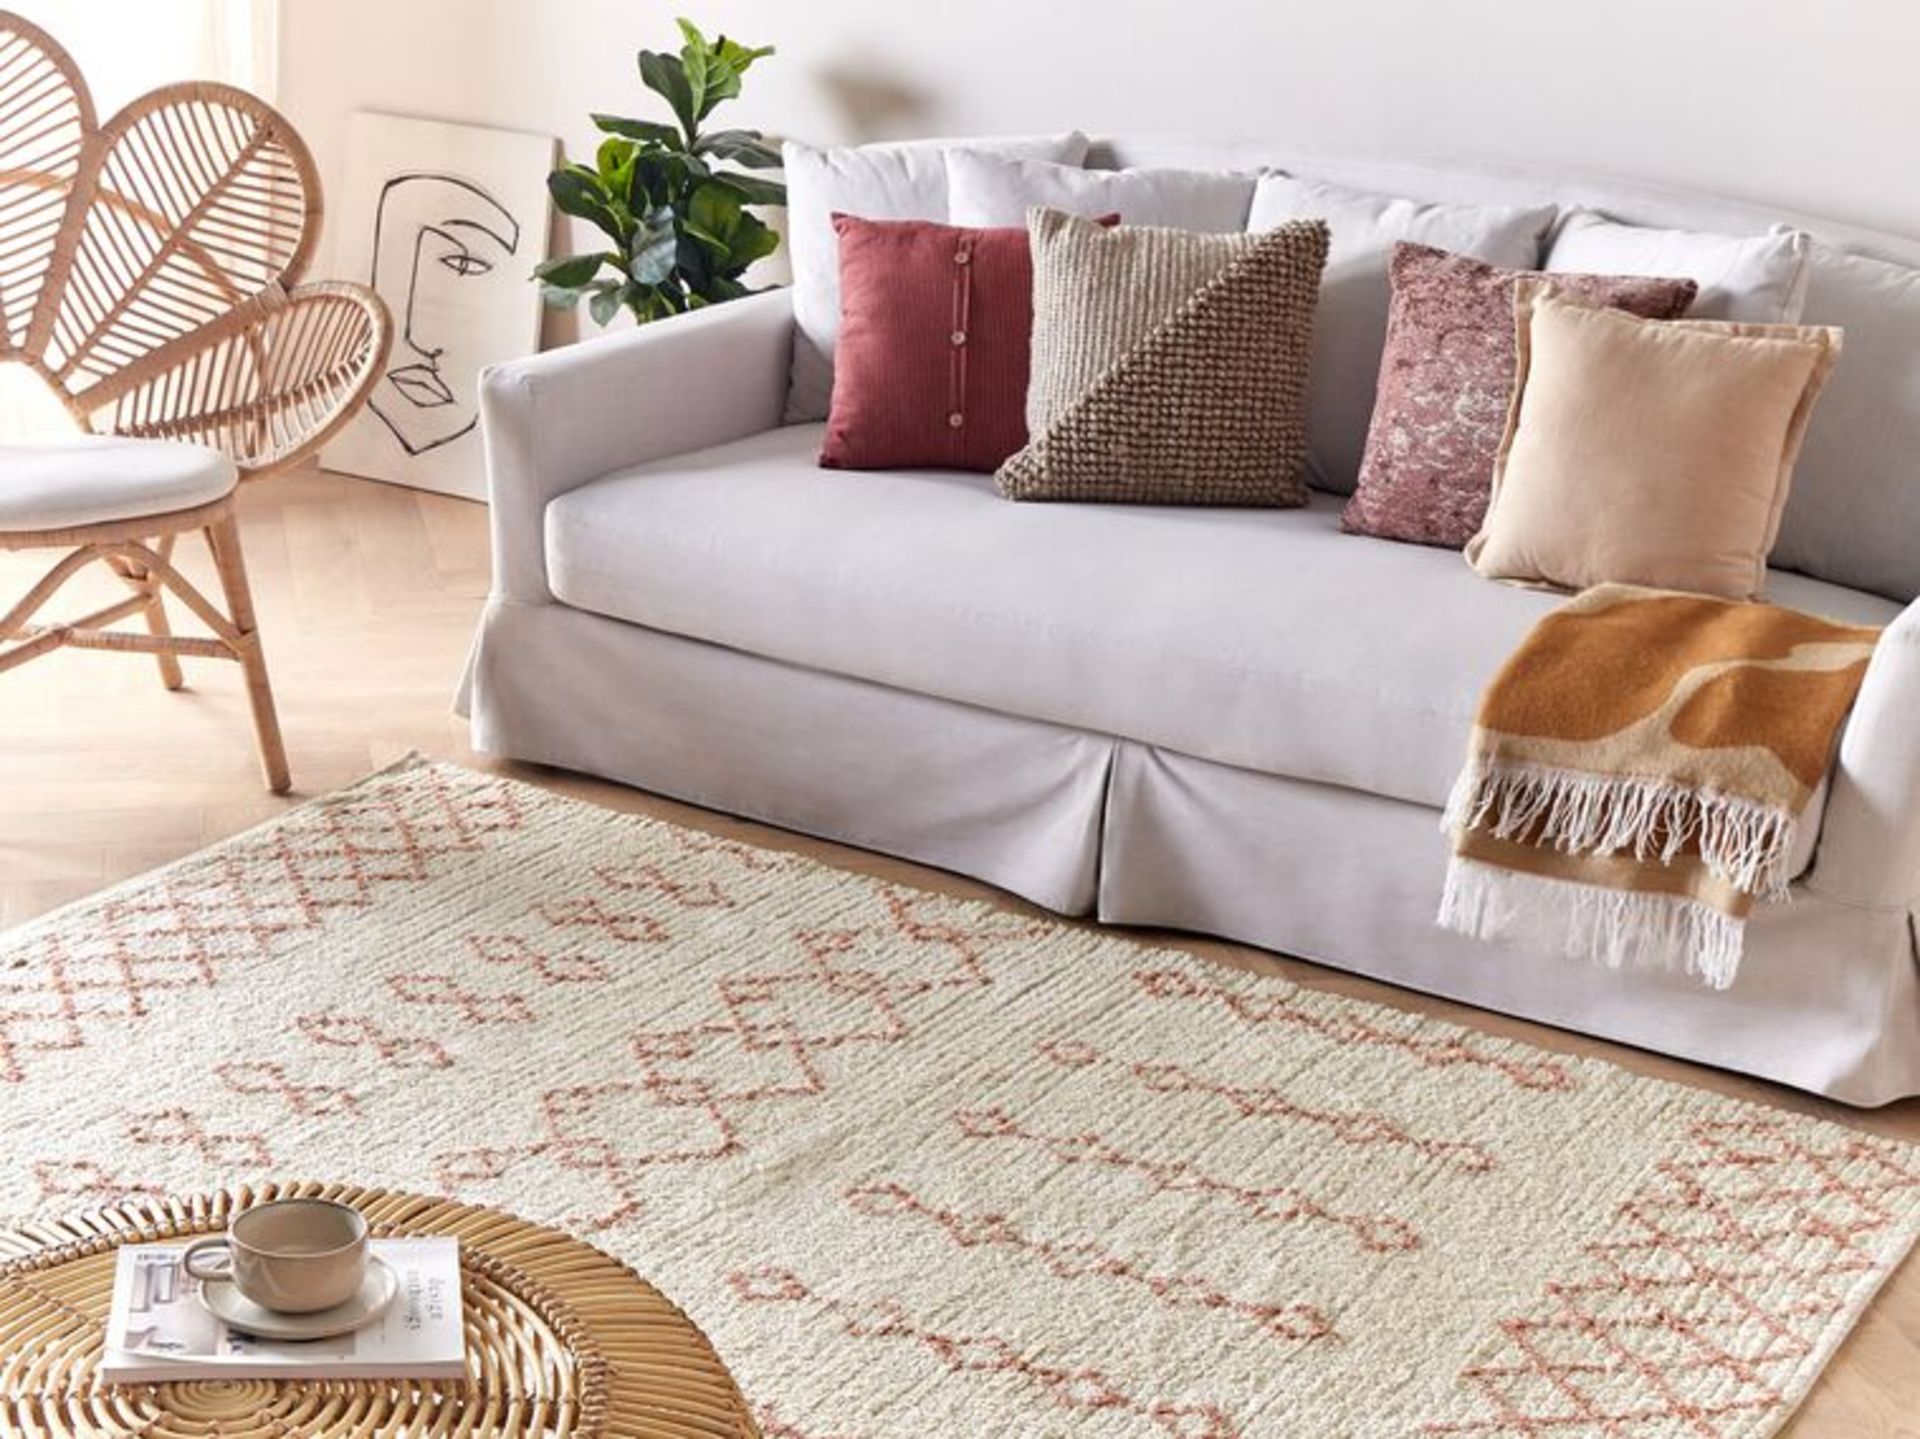 Buxar Cotton Area Rug 160 x 230 cm Beige and Pink. - R13a.11. RRP £189.99. Complete the look of